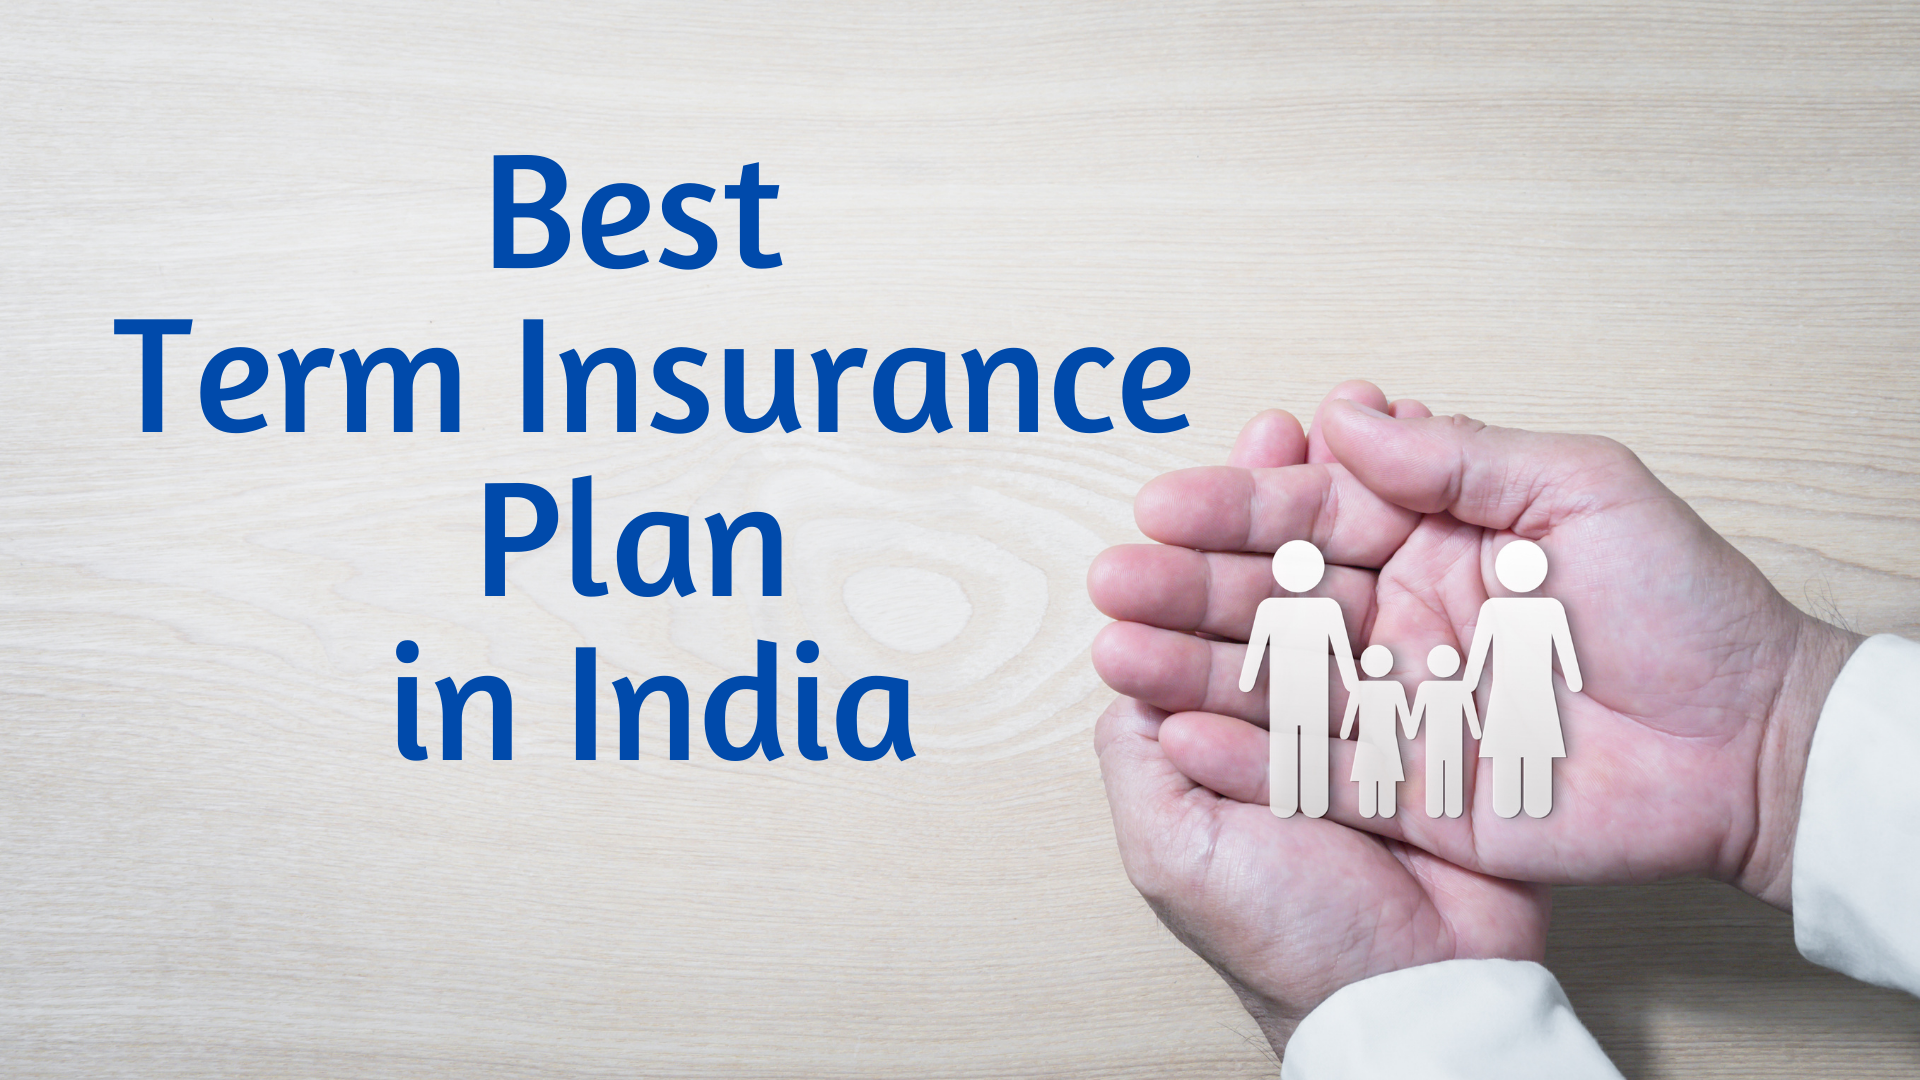 Best Term Insurance Plan in India 1 Get Rs 10000 cash in advance at non-network hospital